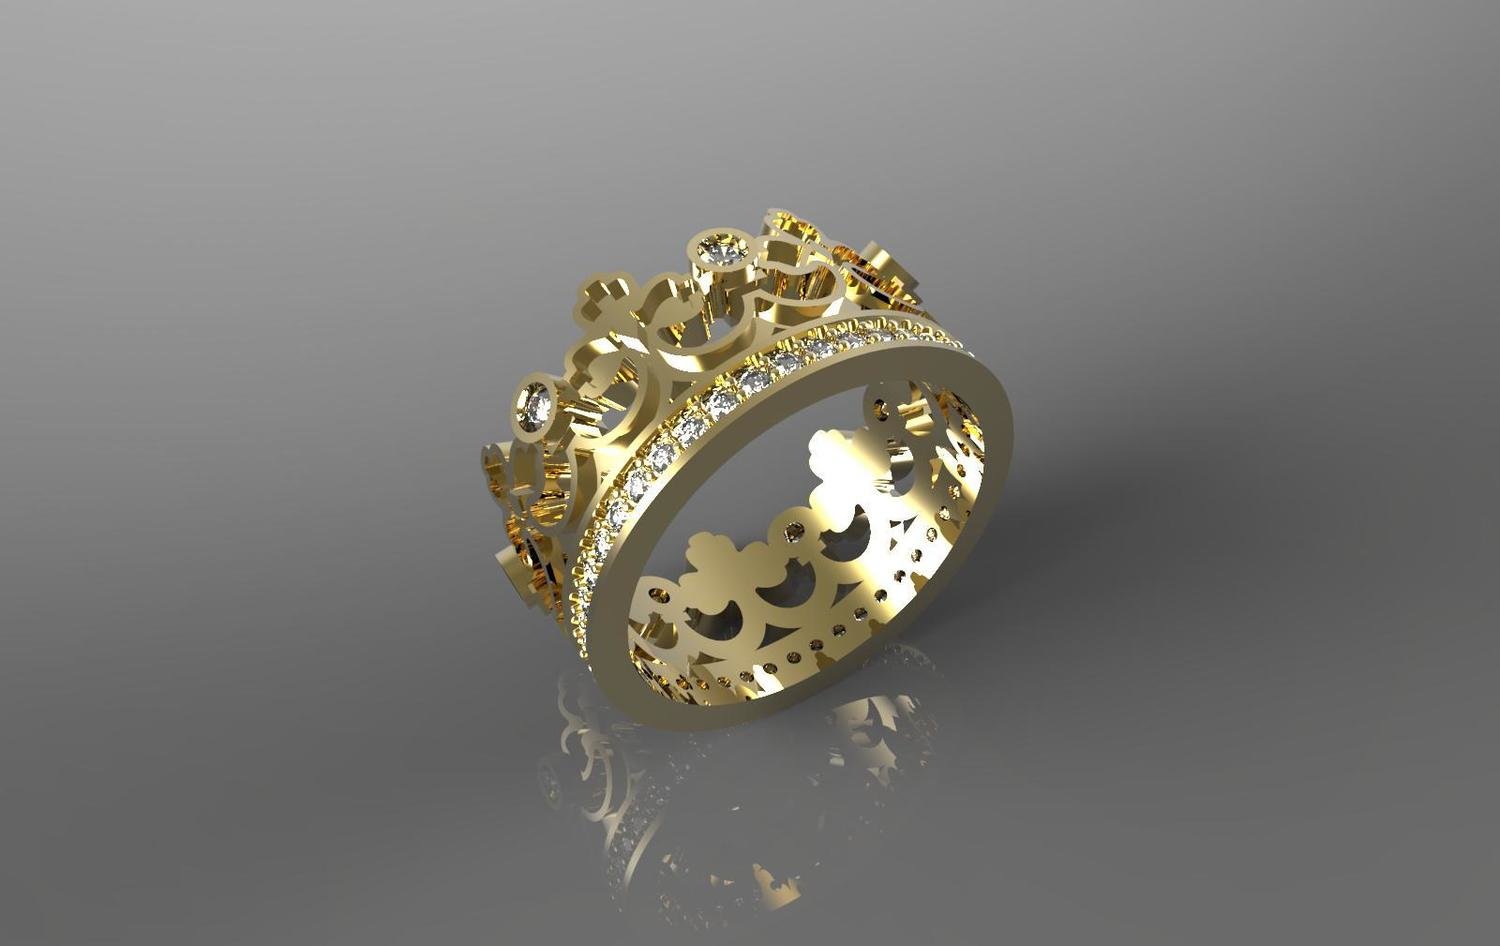 3D CAD Model of Wedding Ring with Diamonds